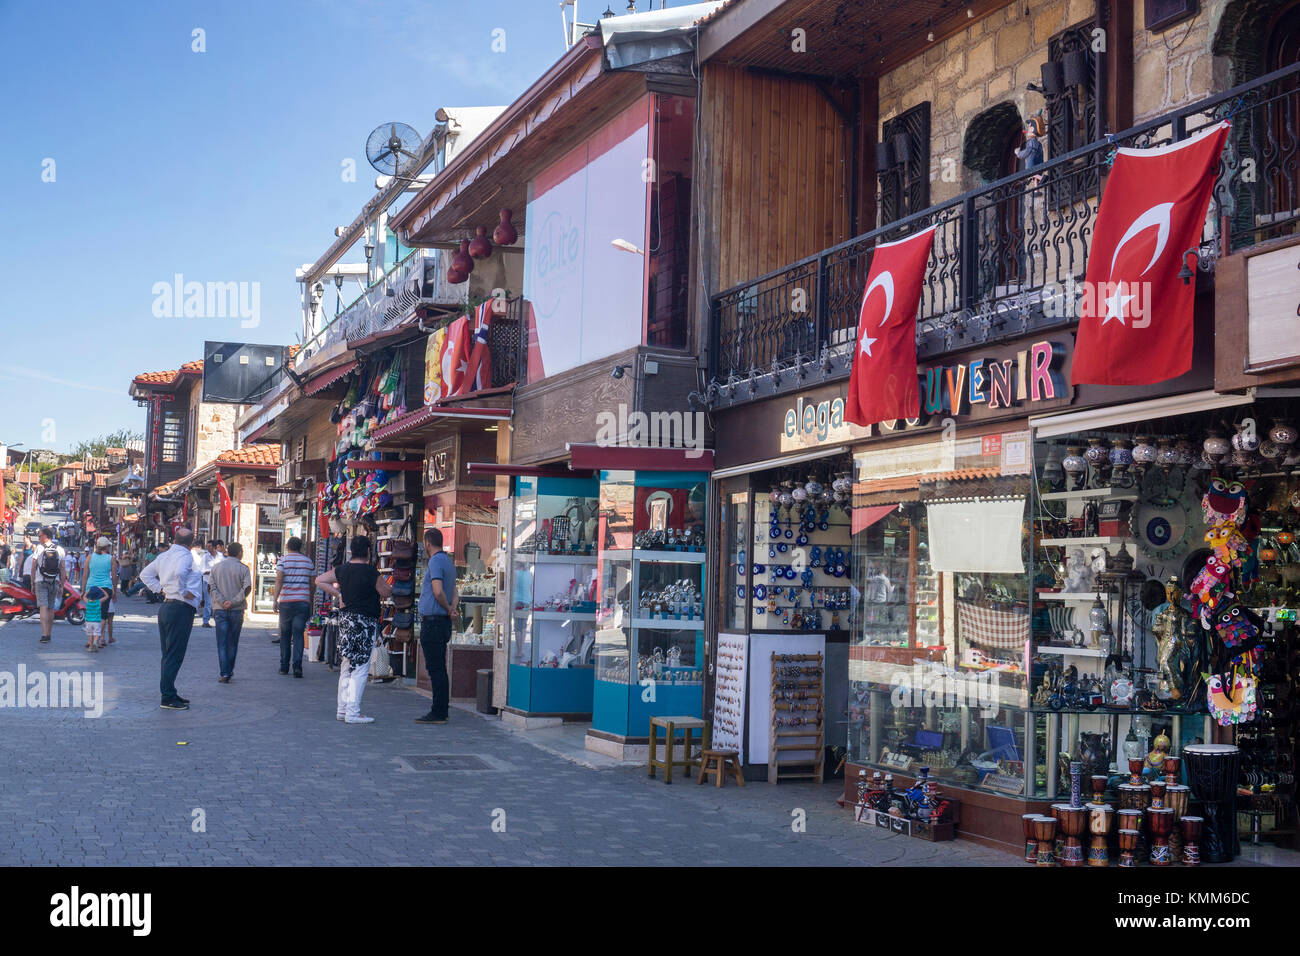 Bazaar, Souvenir shops at the old town of Side, turkish riviera, Turkey Stock Photo